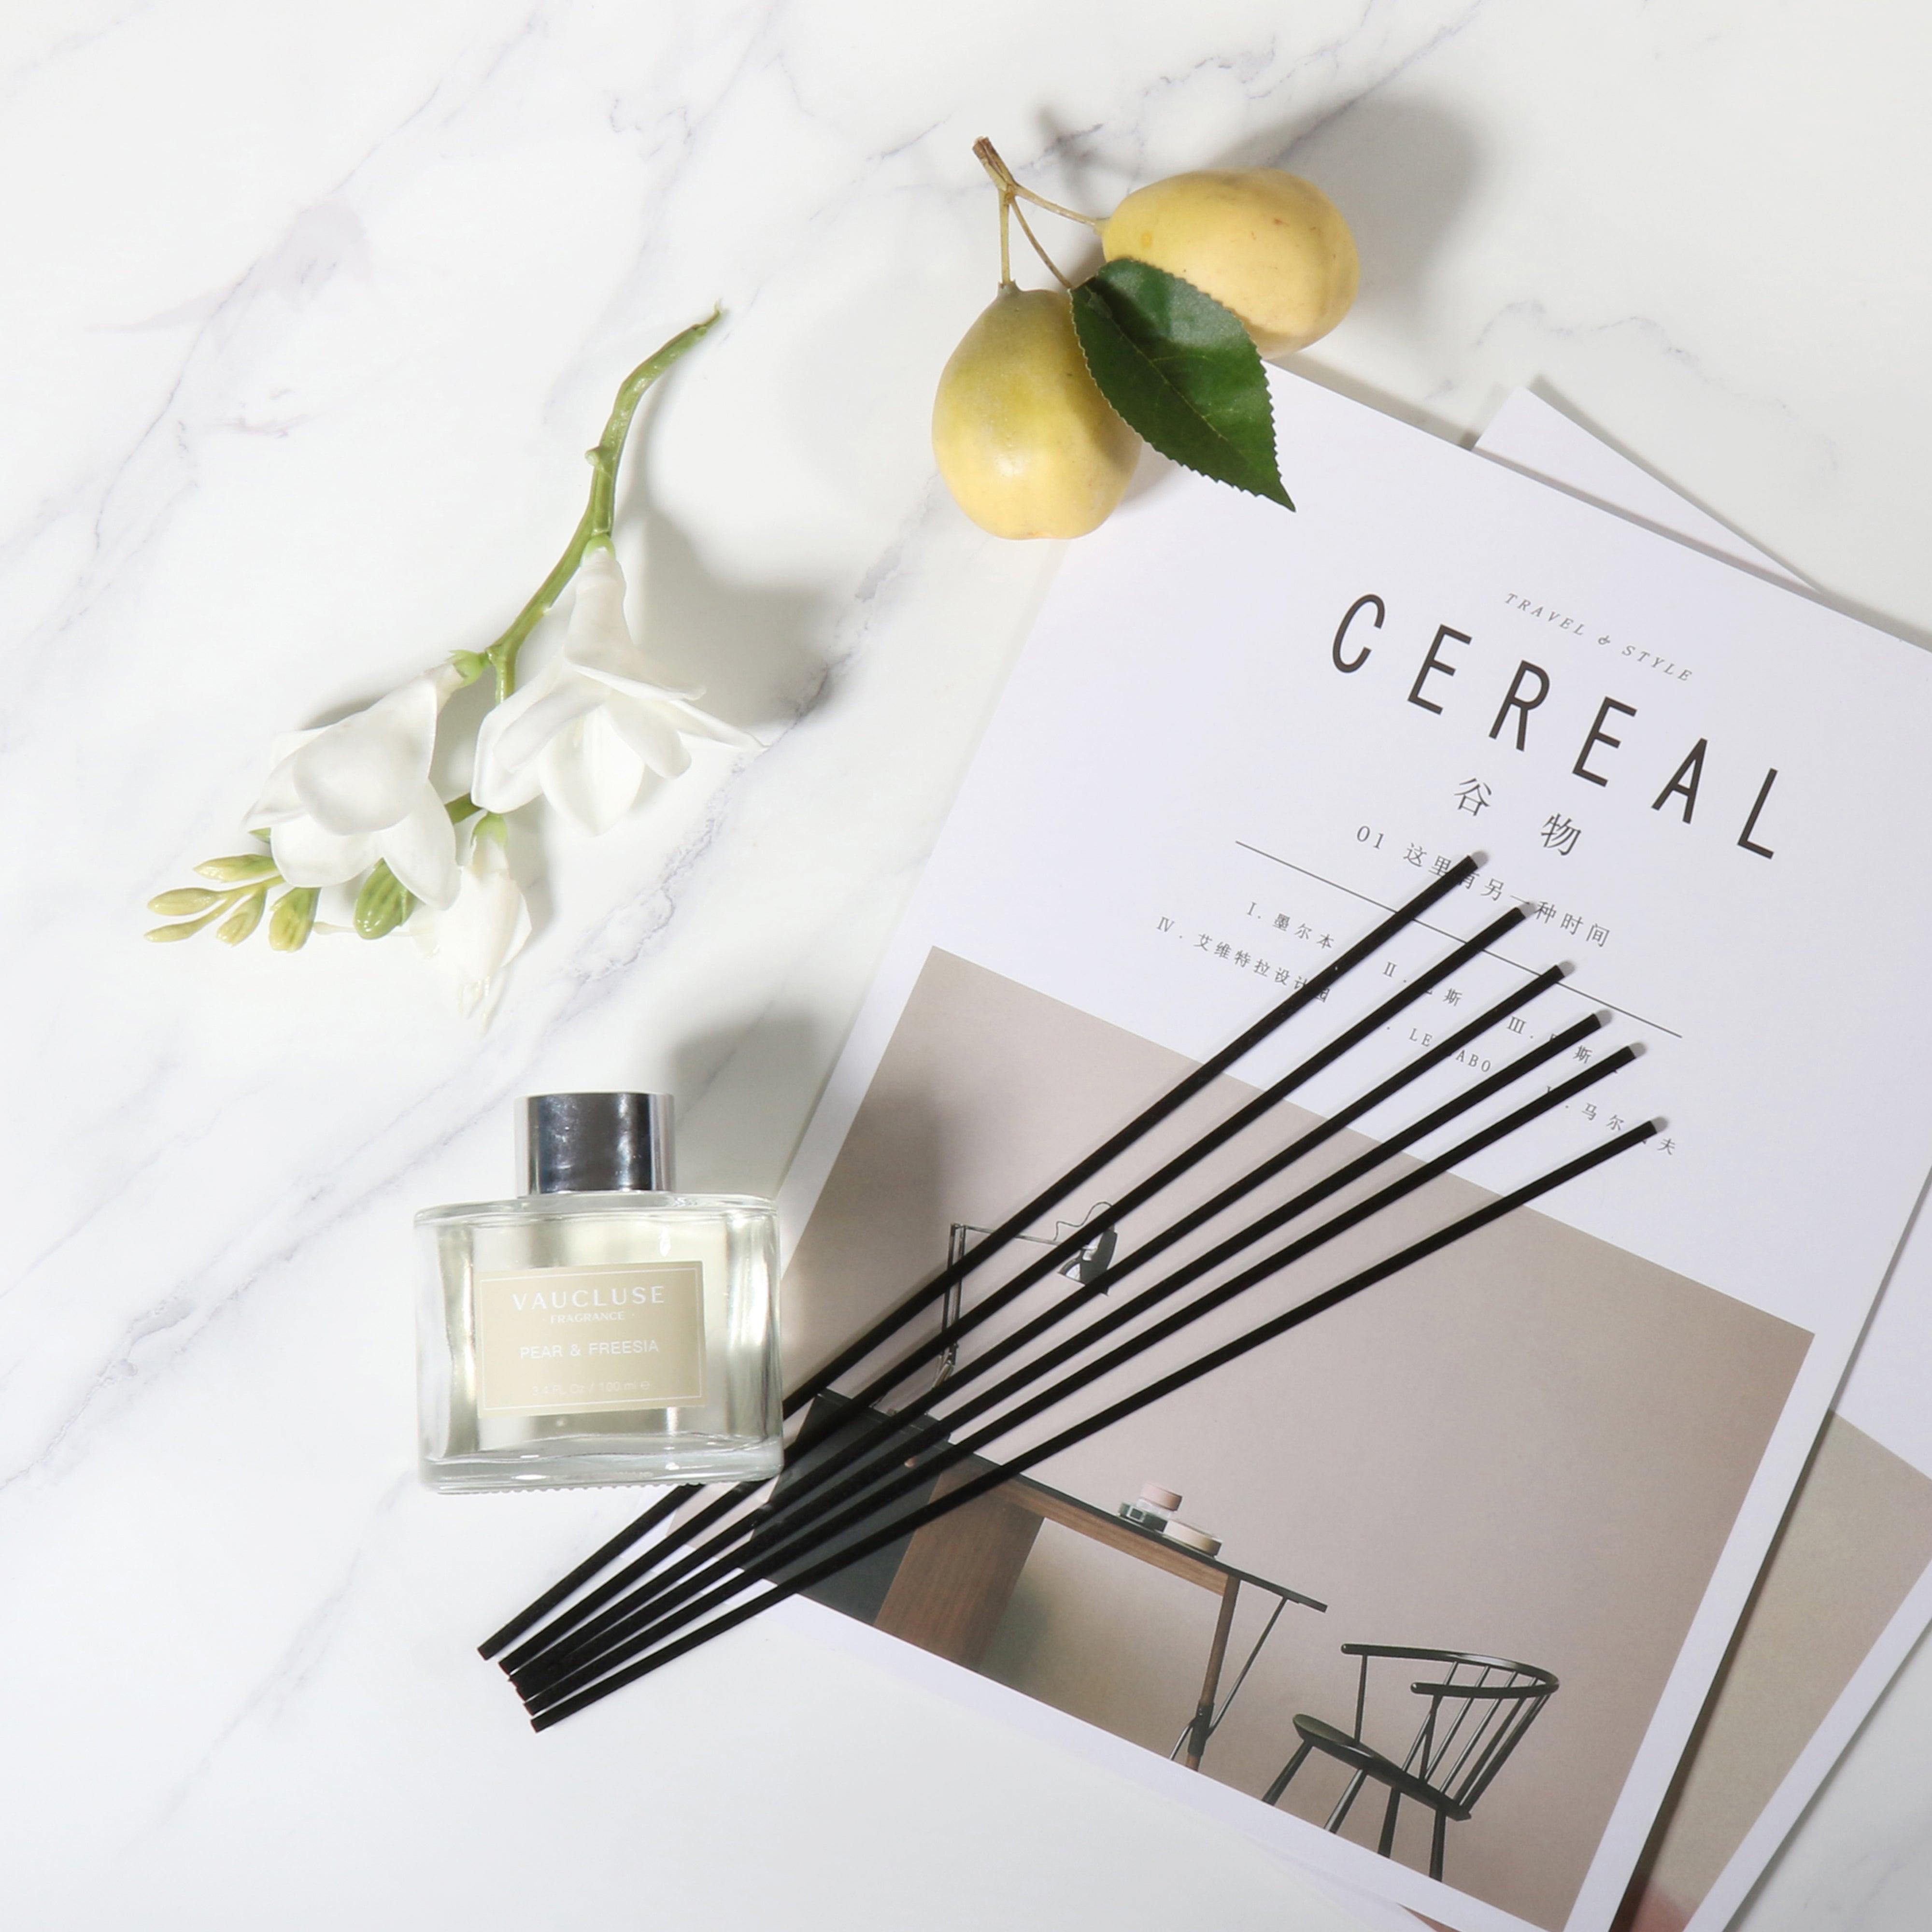 Pear &amp; Freesia Scented Reed Diffuser - VAUCLUSE